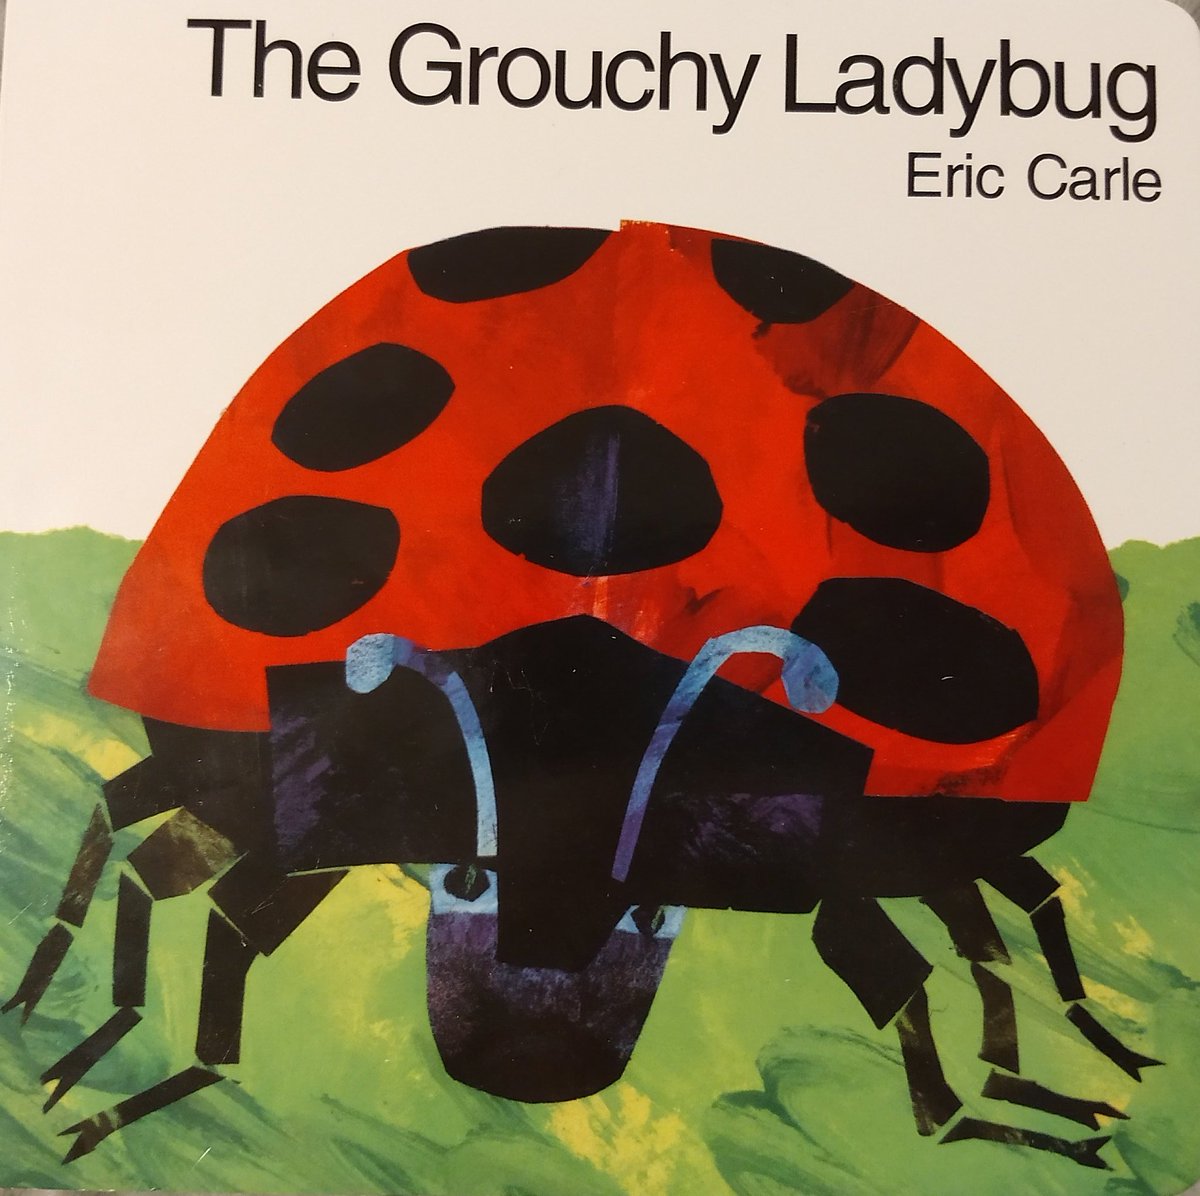 49. Various Eric Carle booksOverall would rate:Caterpillar: 10/10Ladybug: 6/10Bear: 7/10Spider: 9/10Rereading I was slightly irritated that they're overengineered pedagogical devices rather than just stories but the art is gorgeous